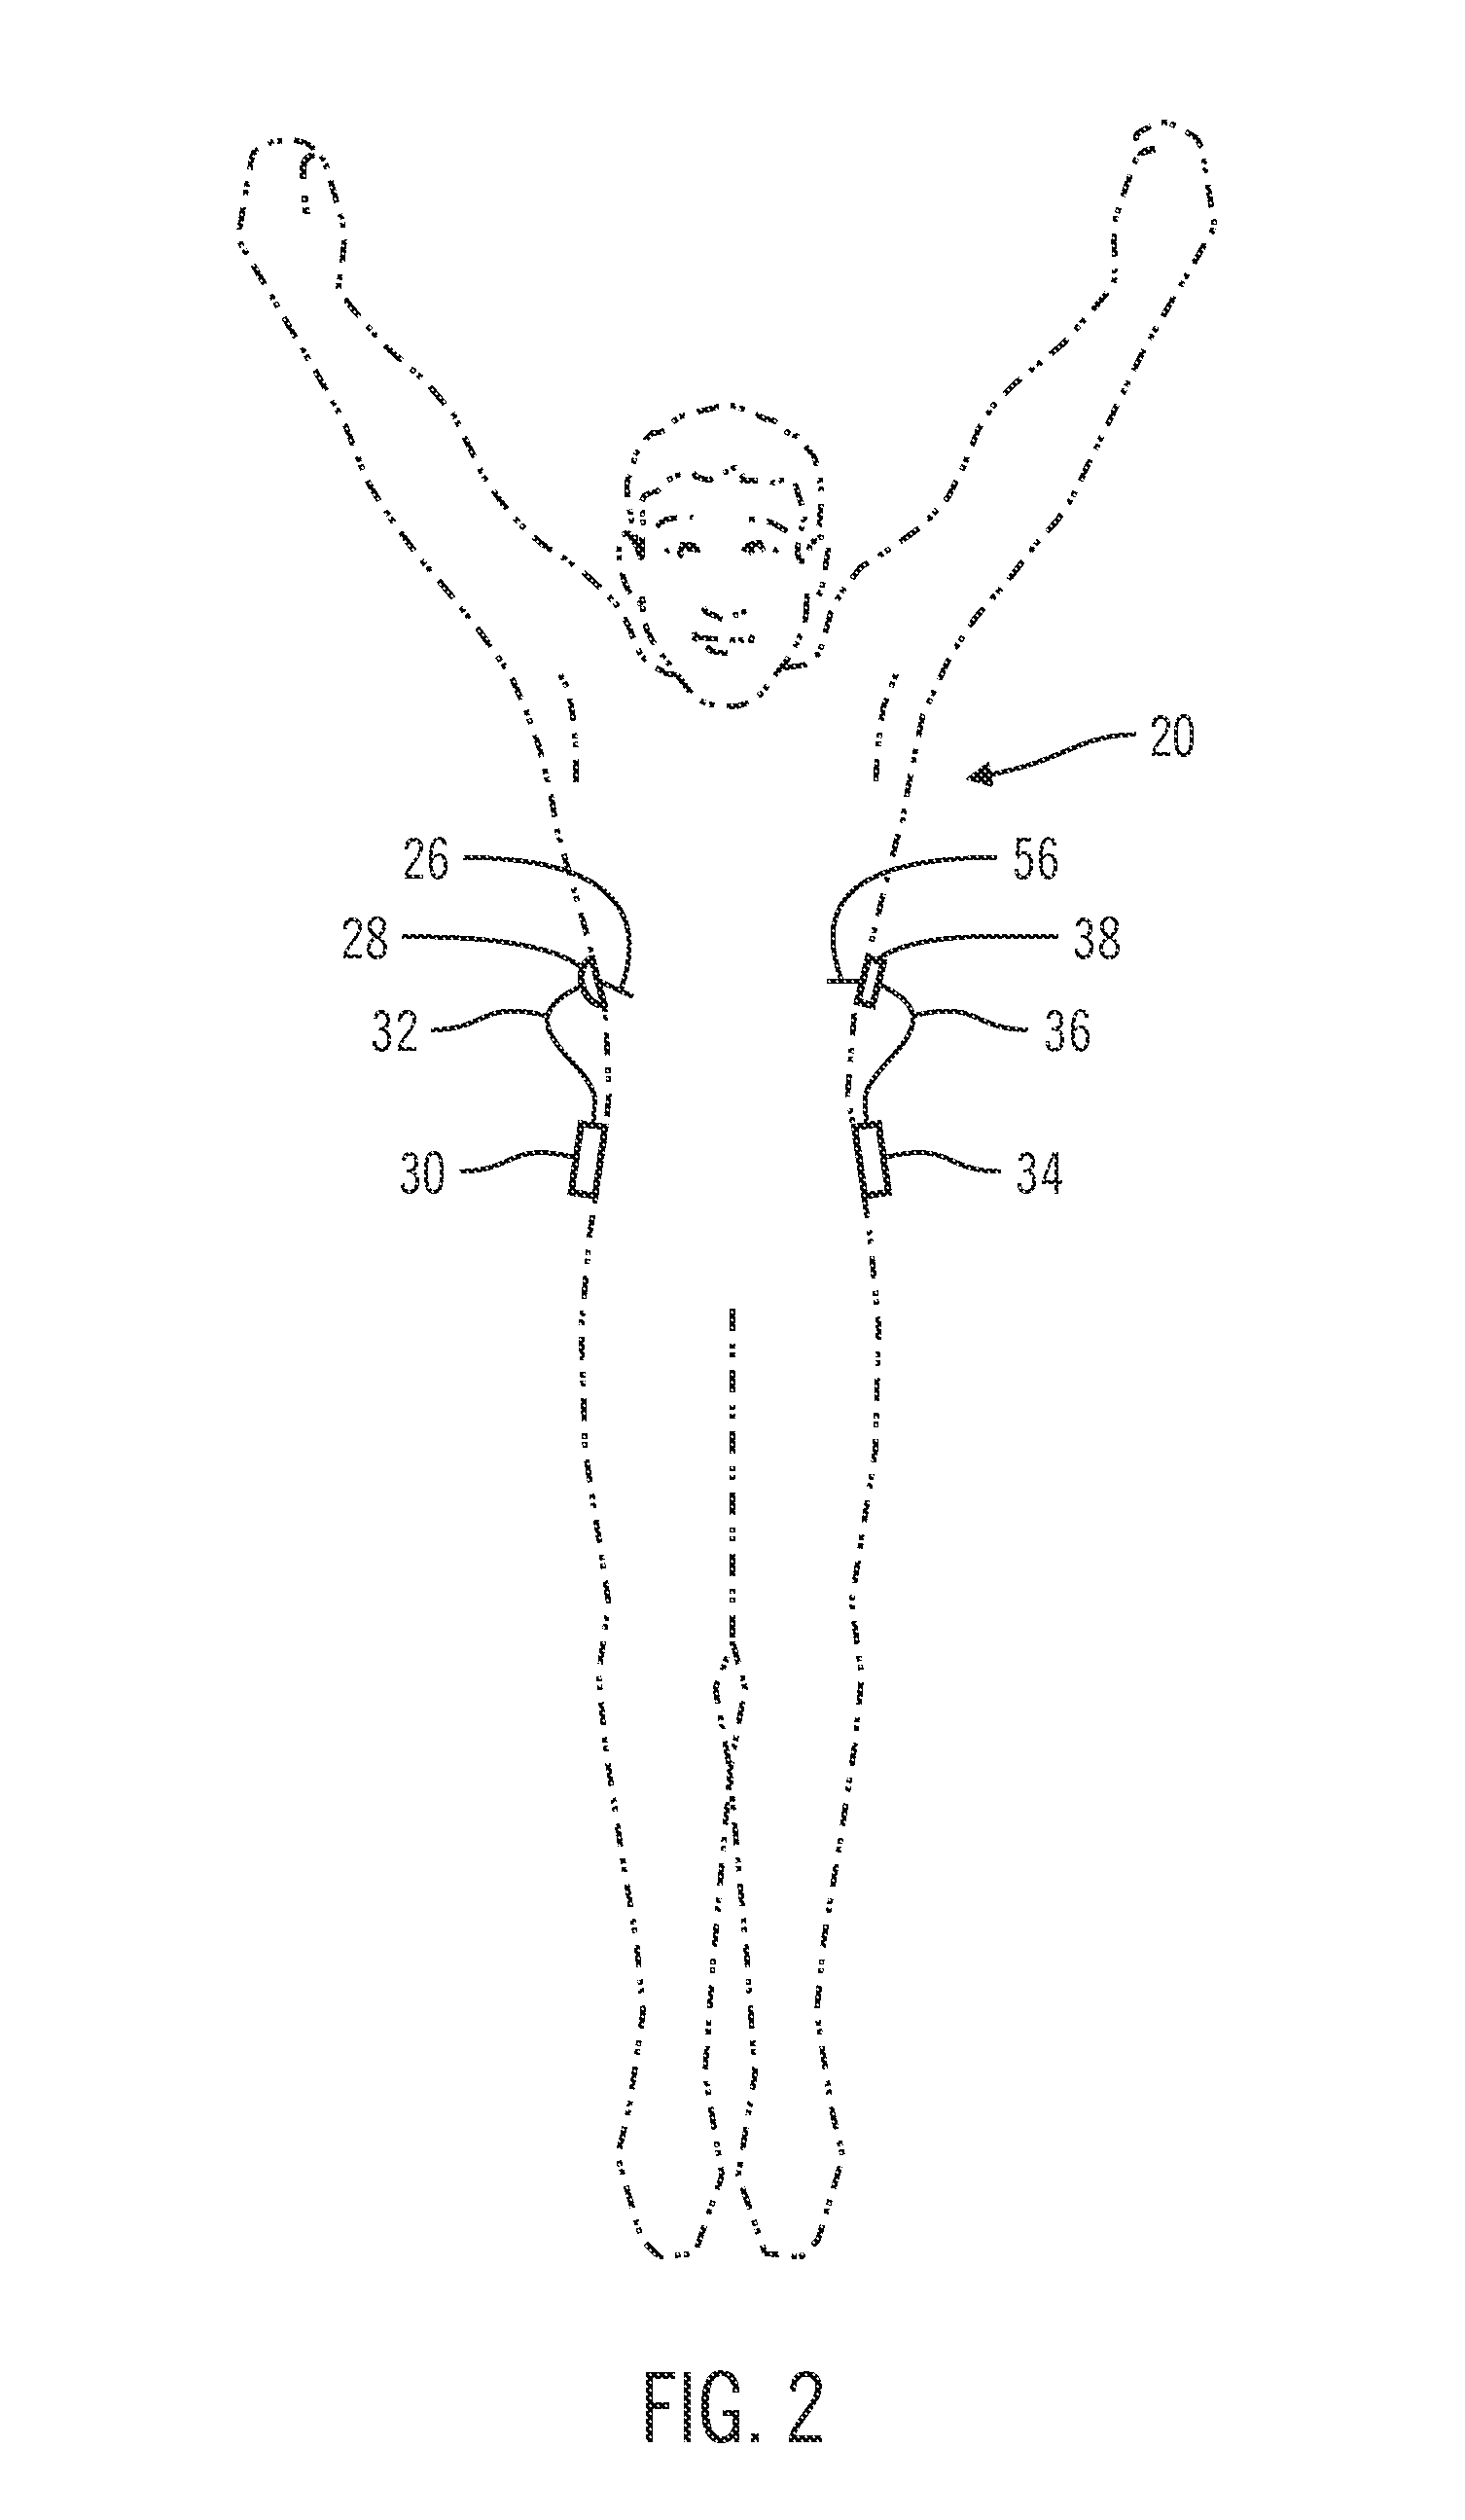 Generation of target glucose values for a closed-loop operating mode of an insulin infusion system